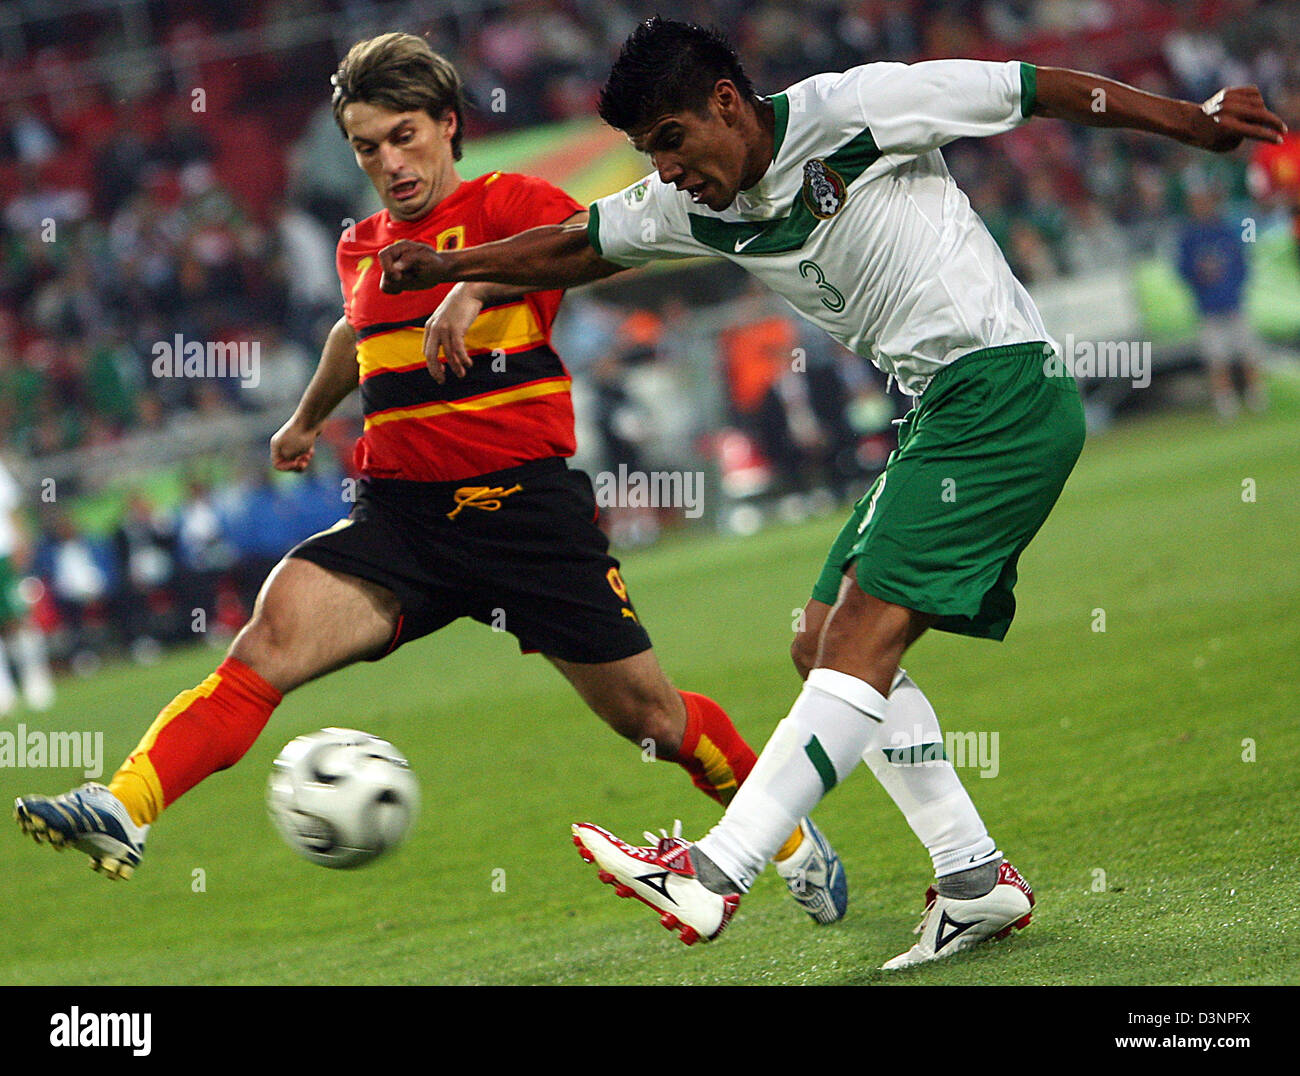 Mexican player Carlos Salcido (R) vies with Figueiredo (L) from Angola during the group D preliminary match of the 2006 FIFA World Cup between Mexico and Angola in Hanover, Germany, Friday, 16 June 2006. Photo: CARMEN JASPERSEN +++ Mobile Services OUT +++ Please also refer to FIFA's Terms and Conditions. Stock Photo